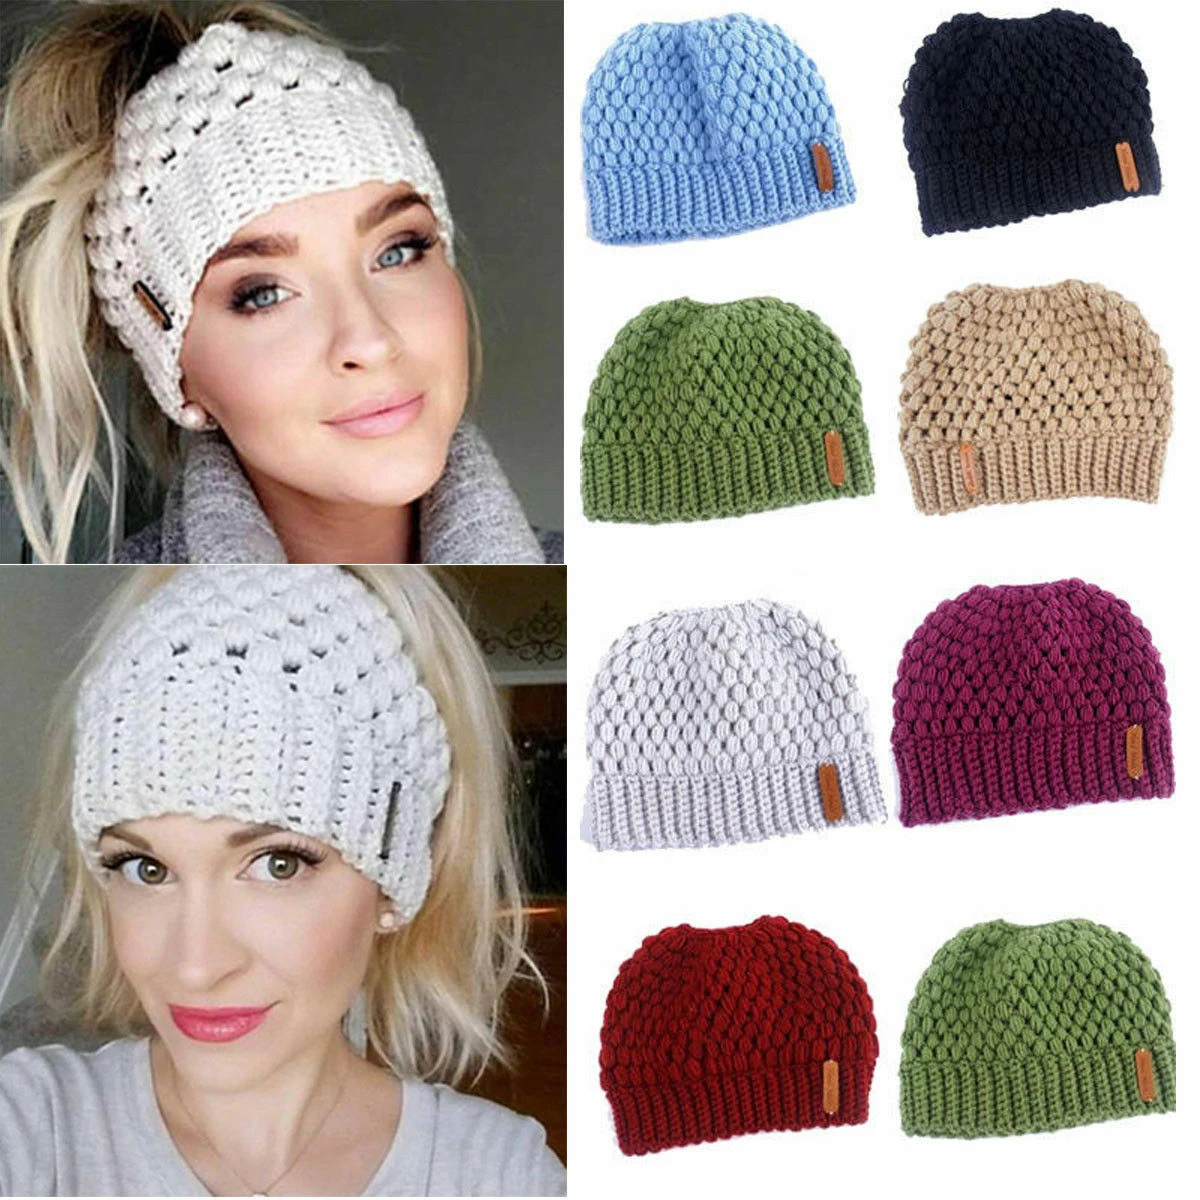 Winter Knitting Hats Winter Women Hat Ladies Girl Stretch Knit Hat With Tag Messy Bun Ponytail Beanie Holey Warm Hats Caps